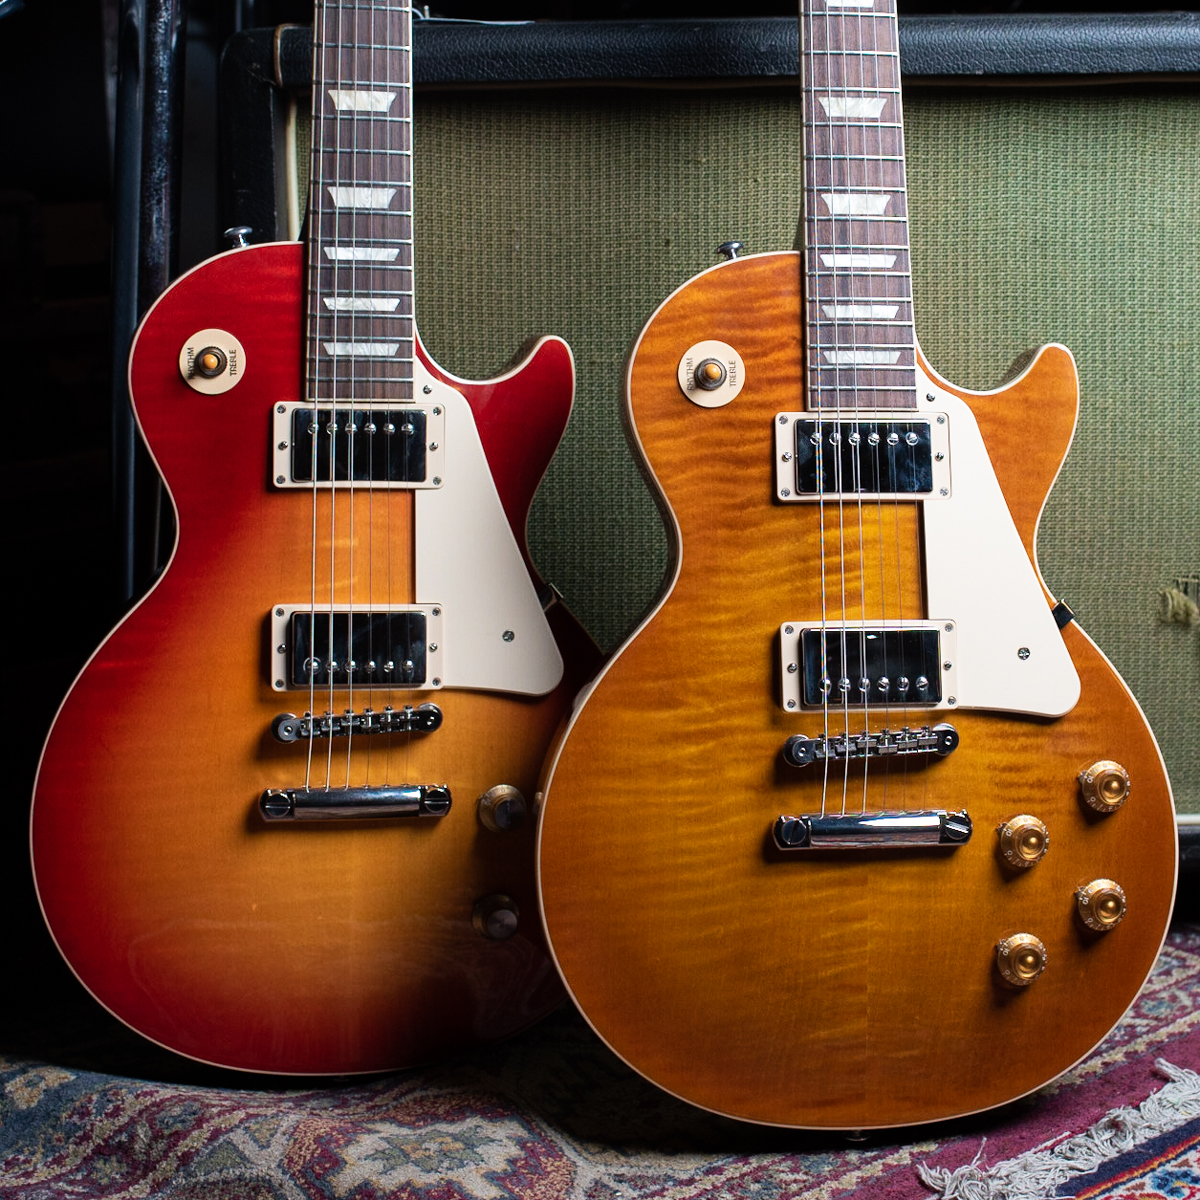 You can only get these CME Exclusive @GibsonGuitar Les Paul Standards here at CME! Sporting either a Dirty Lemon Burst finish inspired by bursts from the late ’50s, or red-orange Tomato Soup Burst on our Standard ’60s models! bit.ly/3u55n3x #GibsonGuitar #CMEexclusive